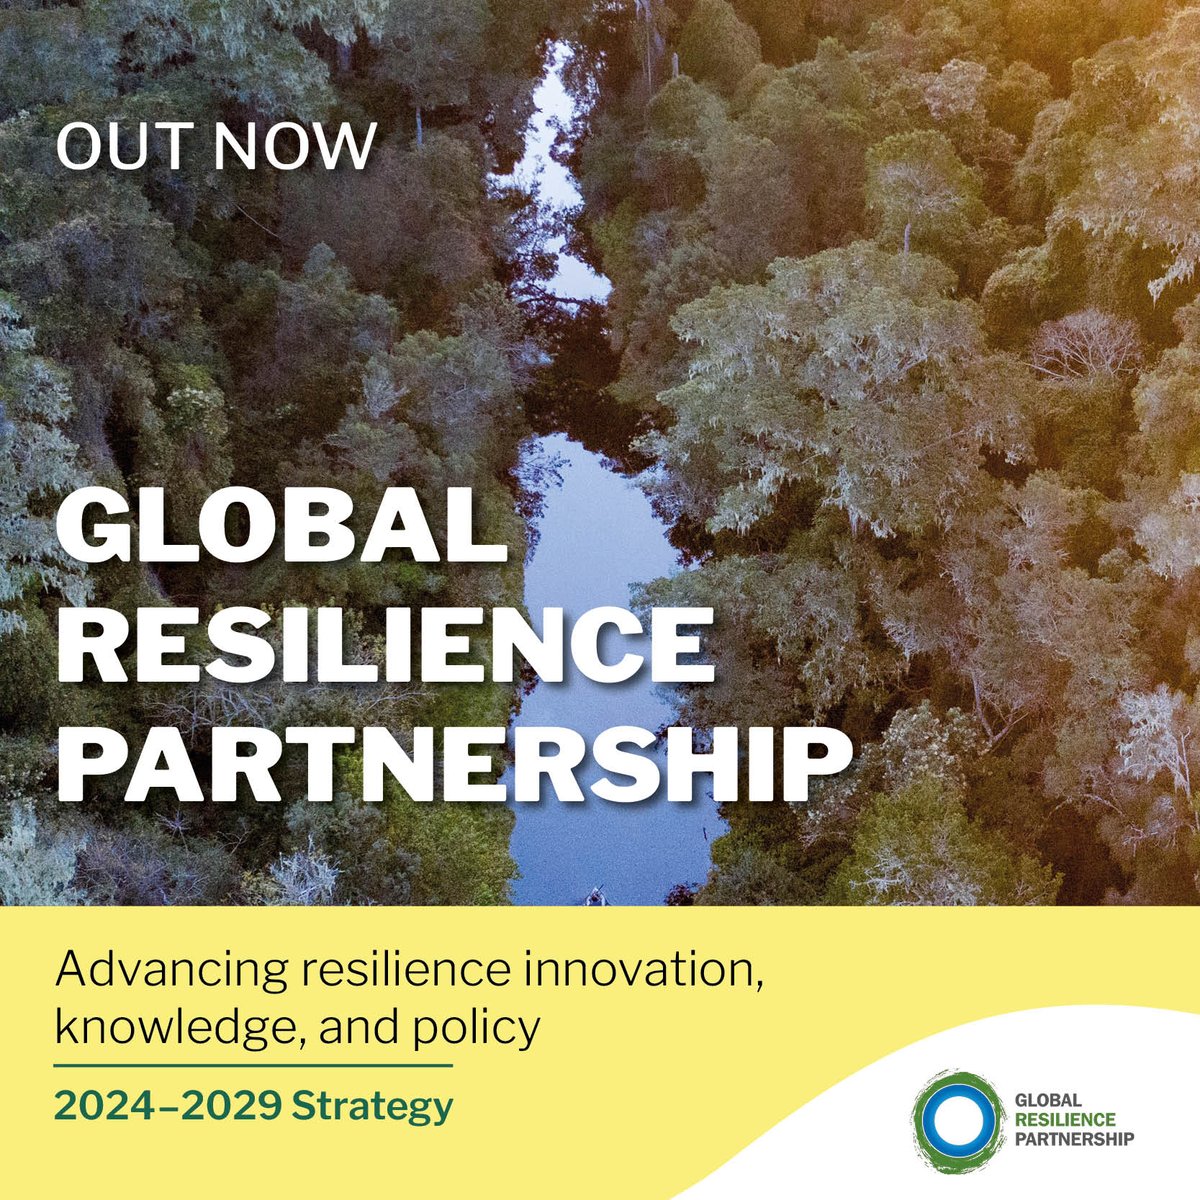 ICIMOD is proud to be among the 80 organizations that together make up the Global Resilience Partnership (GRP). GRP’s new strategy, launching today, focuses on food, finance, and communities in countries in the global south that are most vulnerable to climate change impacts. GRP